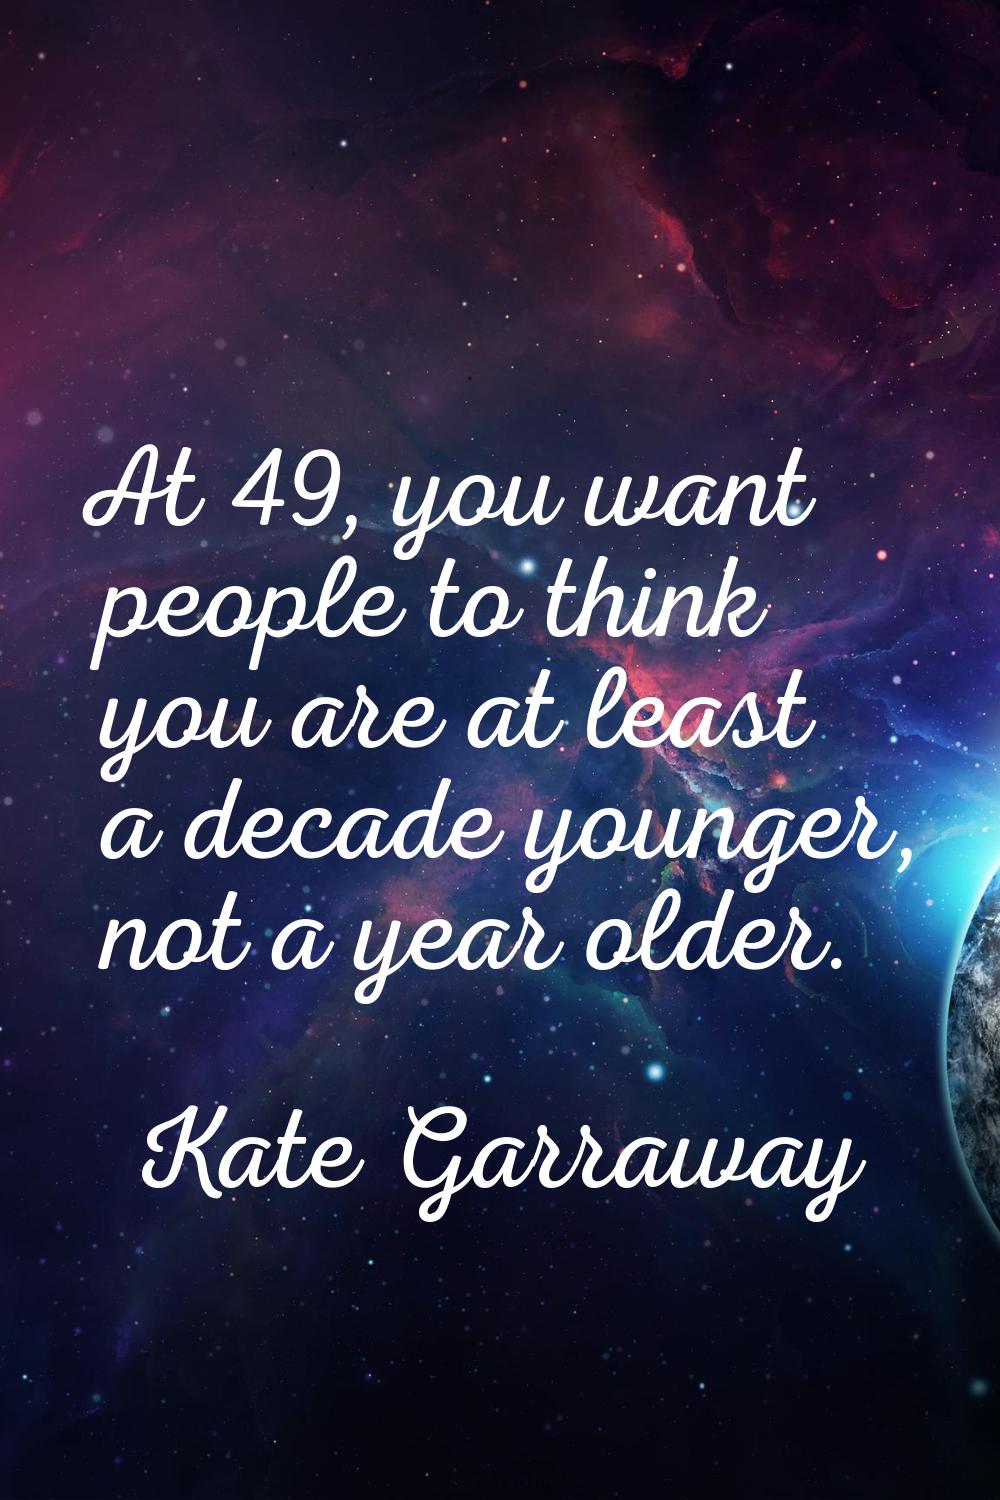 At 49, you want people to think you are at least a decade younger, not a year older.